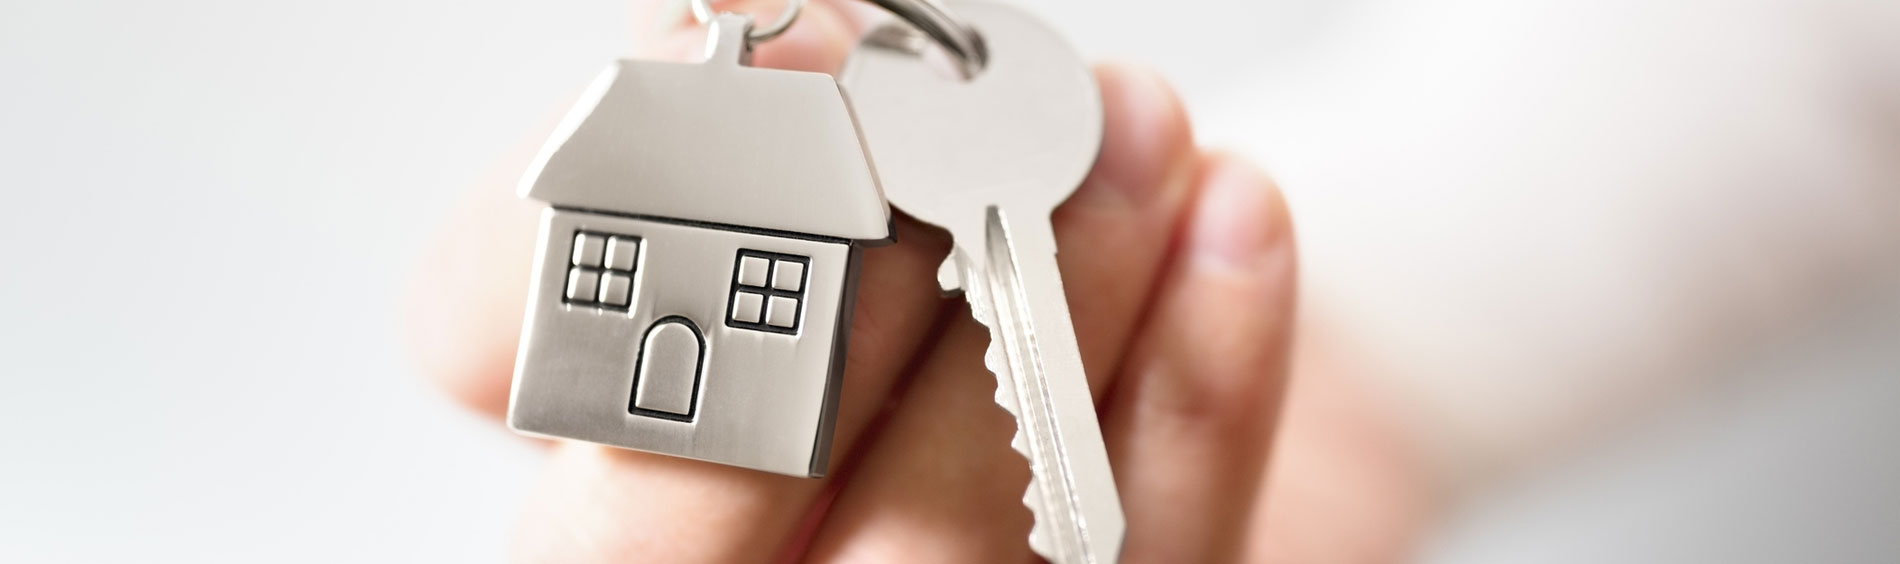 Housing image with keys